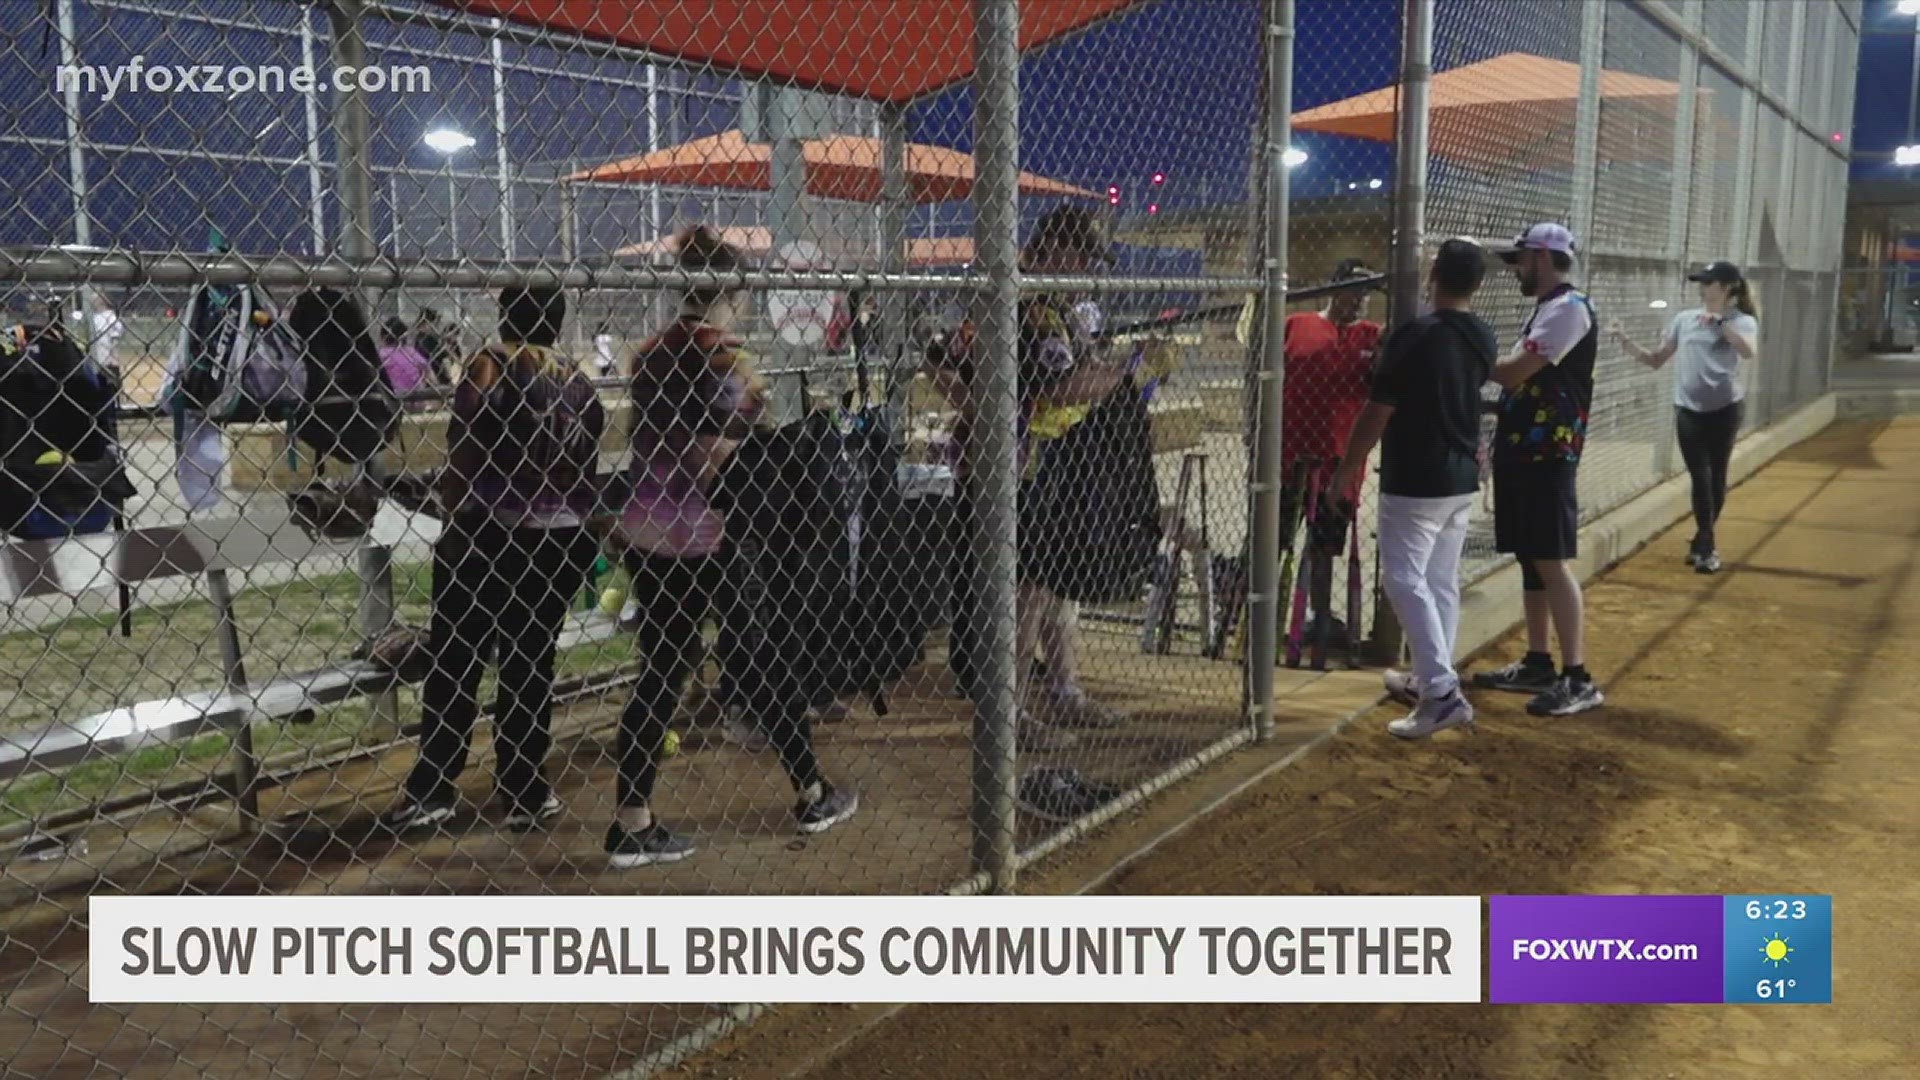 More than 44 teams gather every week at Texas Bank Sports Complex to play slow pitch softball.